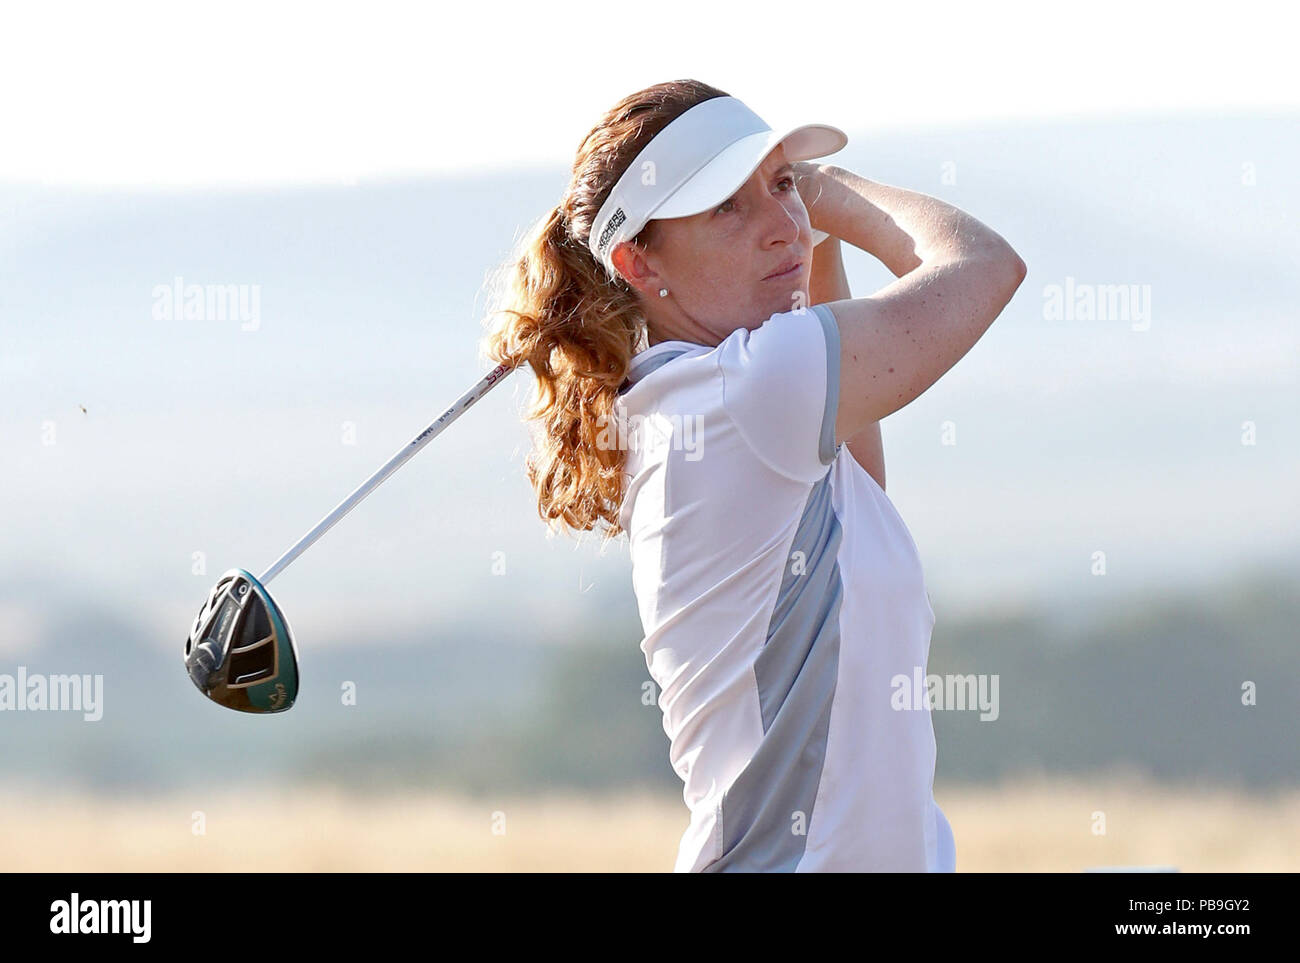 England's Florentyna Parker on the 1st tee during day two of the 2018 Aberdeen Standard Investments Ladies Scottish Open at Gullane Golf Club. PRESS ASSOCIATION Photo, Picture date: Friday July 27, 2018. Photo credit should read: Jane Barlow/PA Wire. RESTRICTIONS: Editorial use only. No commercial use. Stock Photo